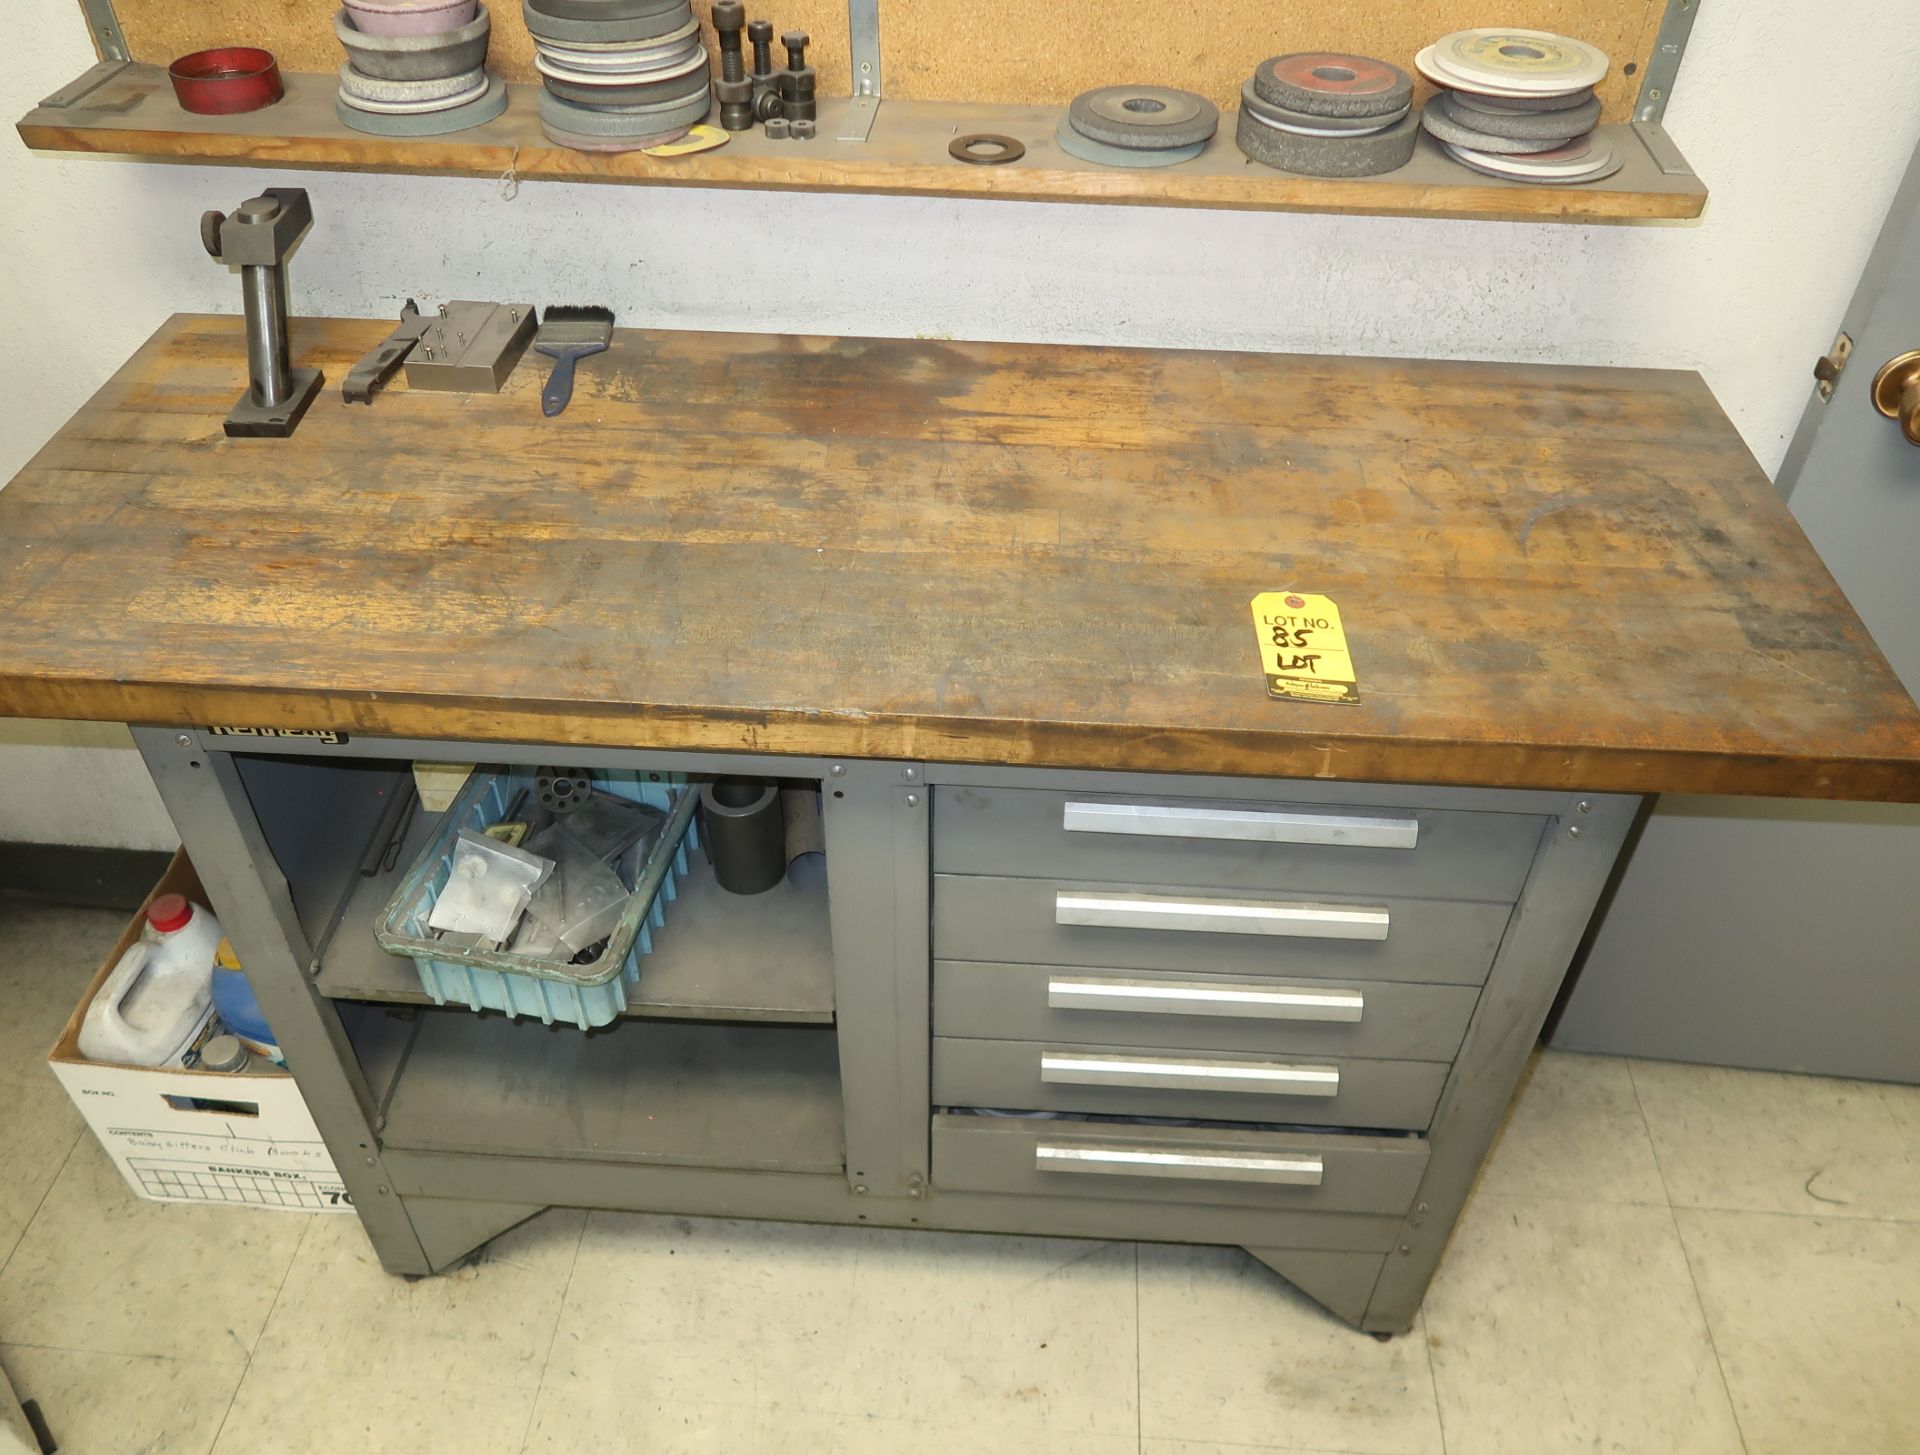 LOT KENNEDY SHOP BENCH W/ DRAWERS & NEW GRINDING WHEELS